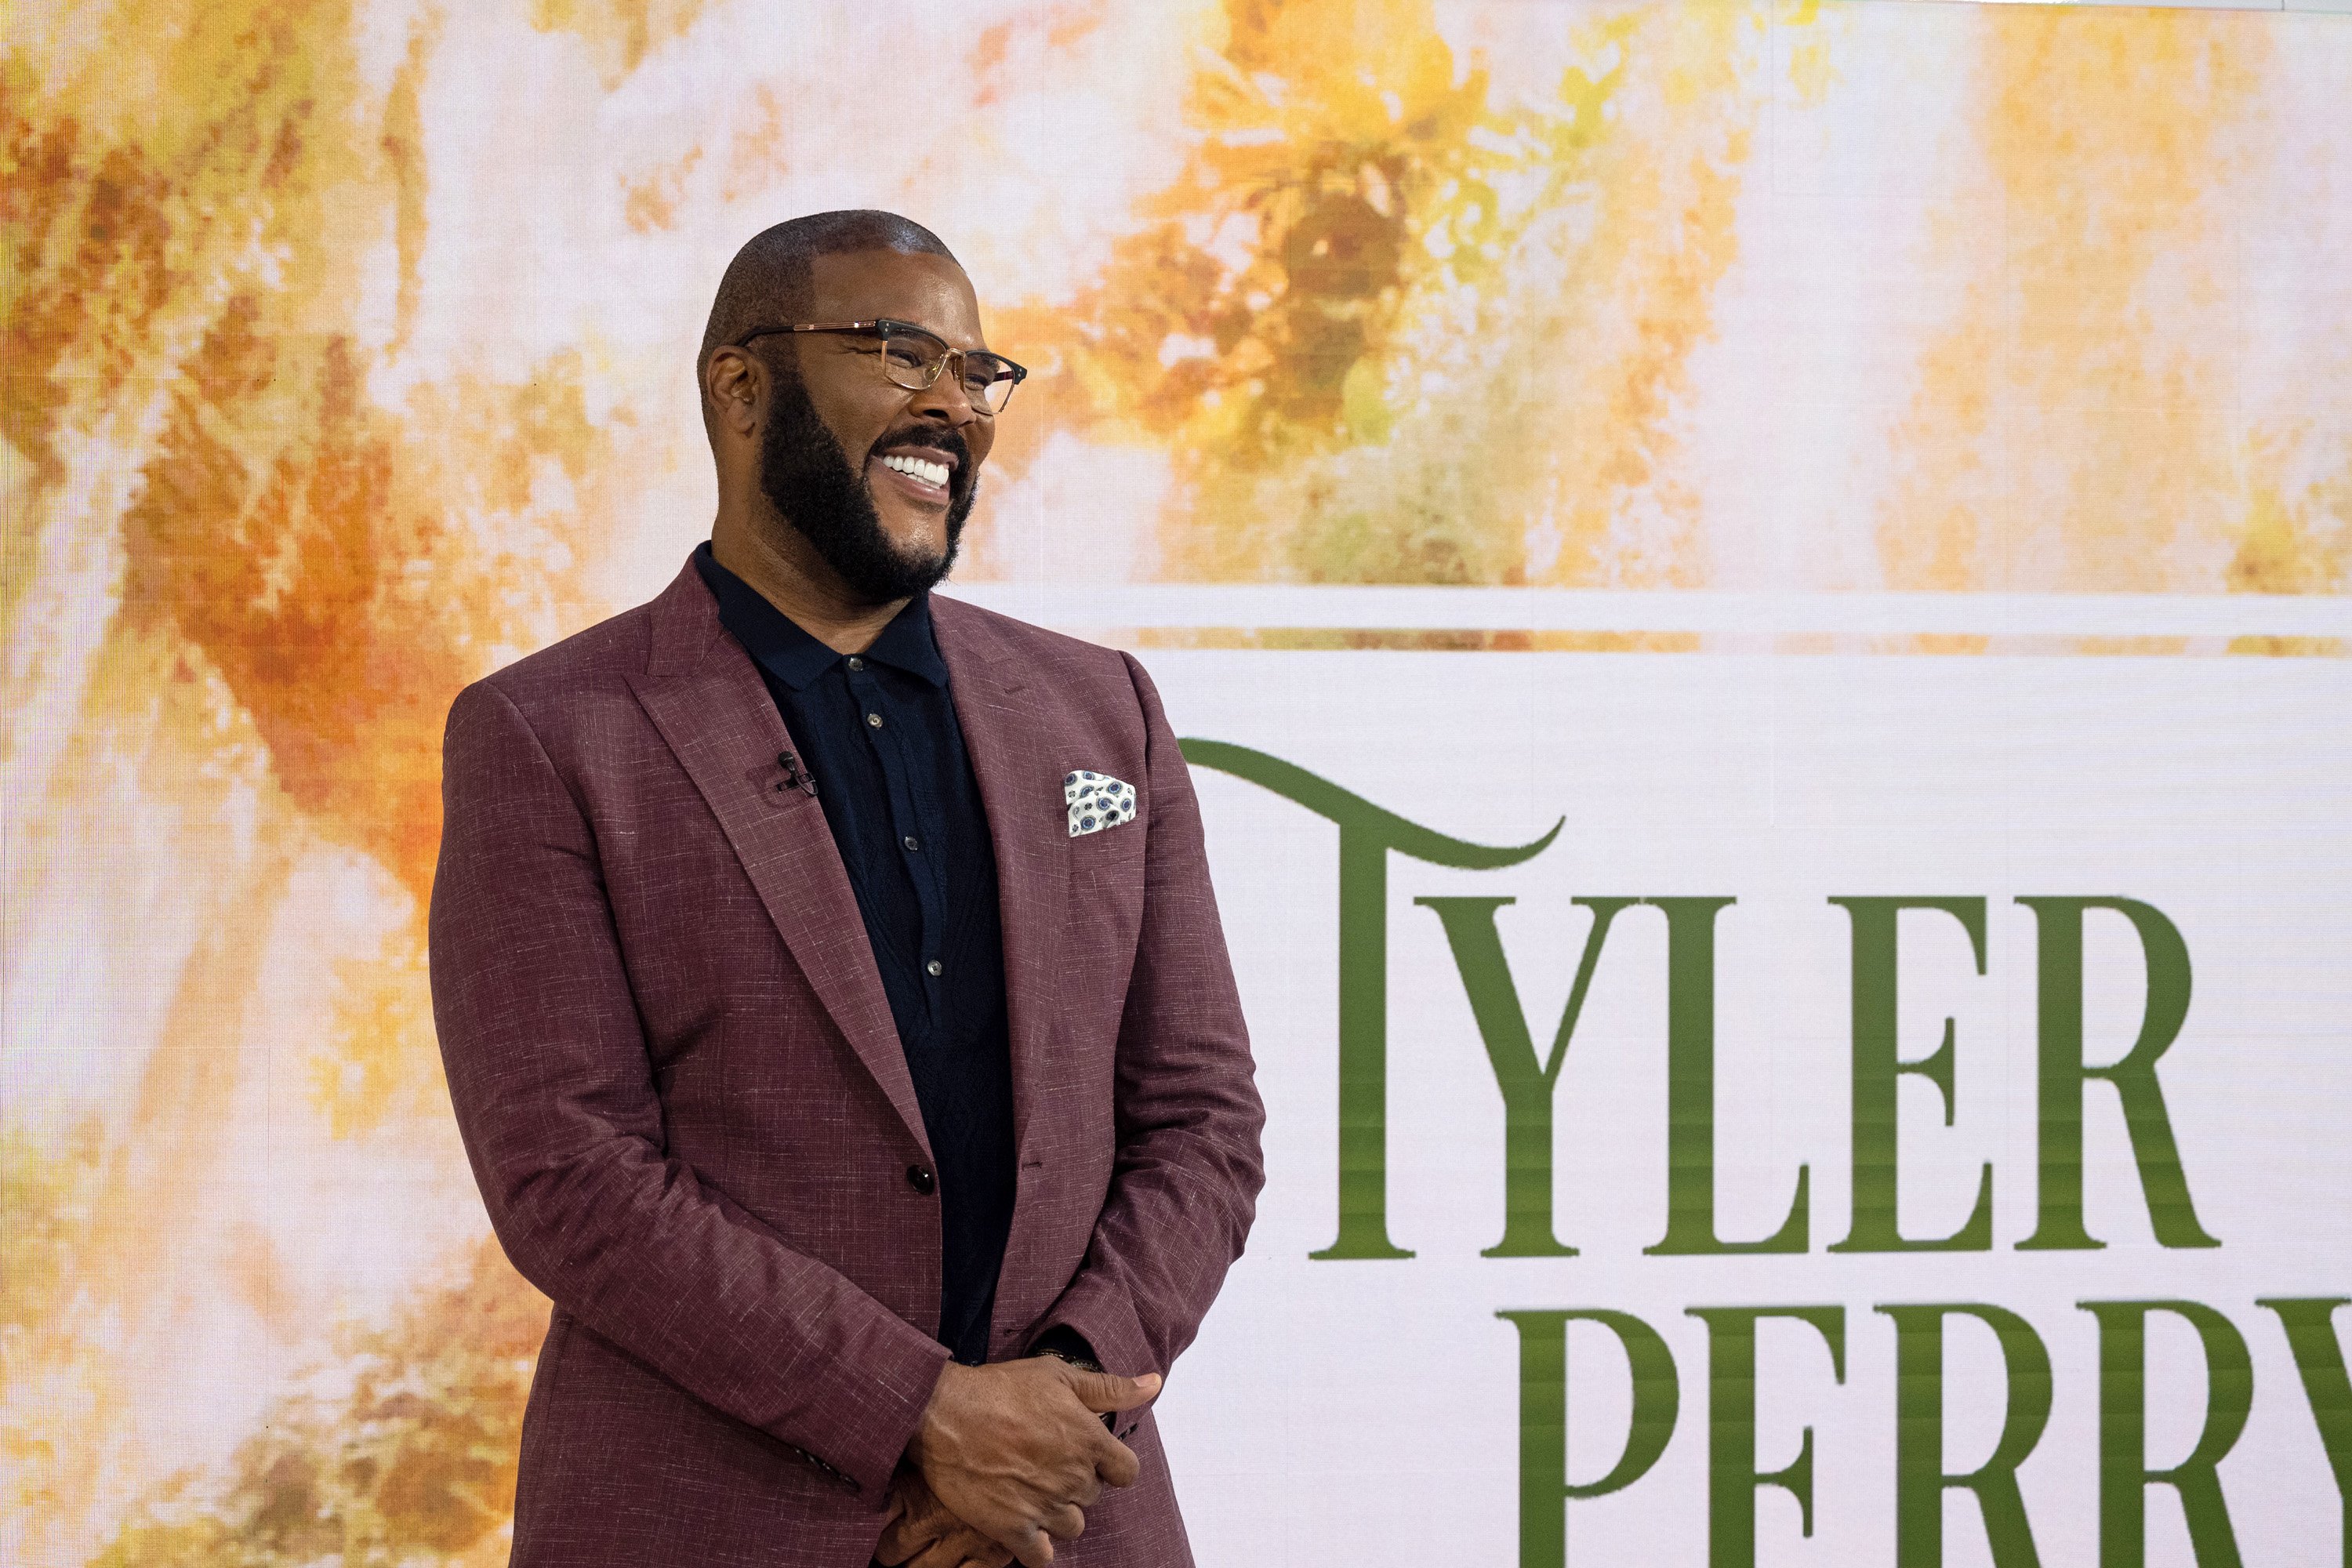 Media mogul Tyler Perry at the Today Show, Wednesday, September 21, 2022. | Source: Getty Images